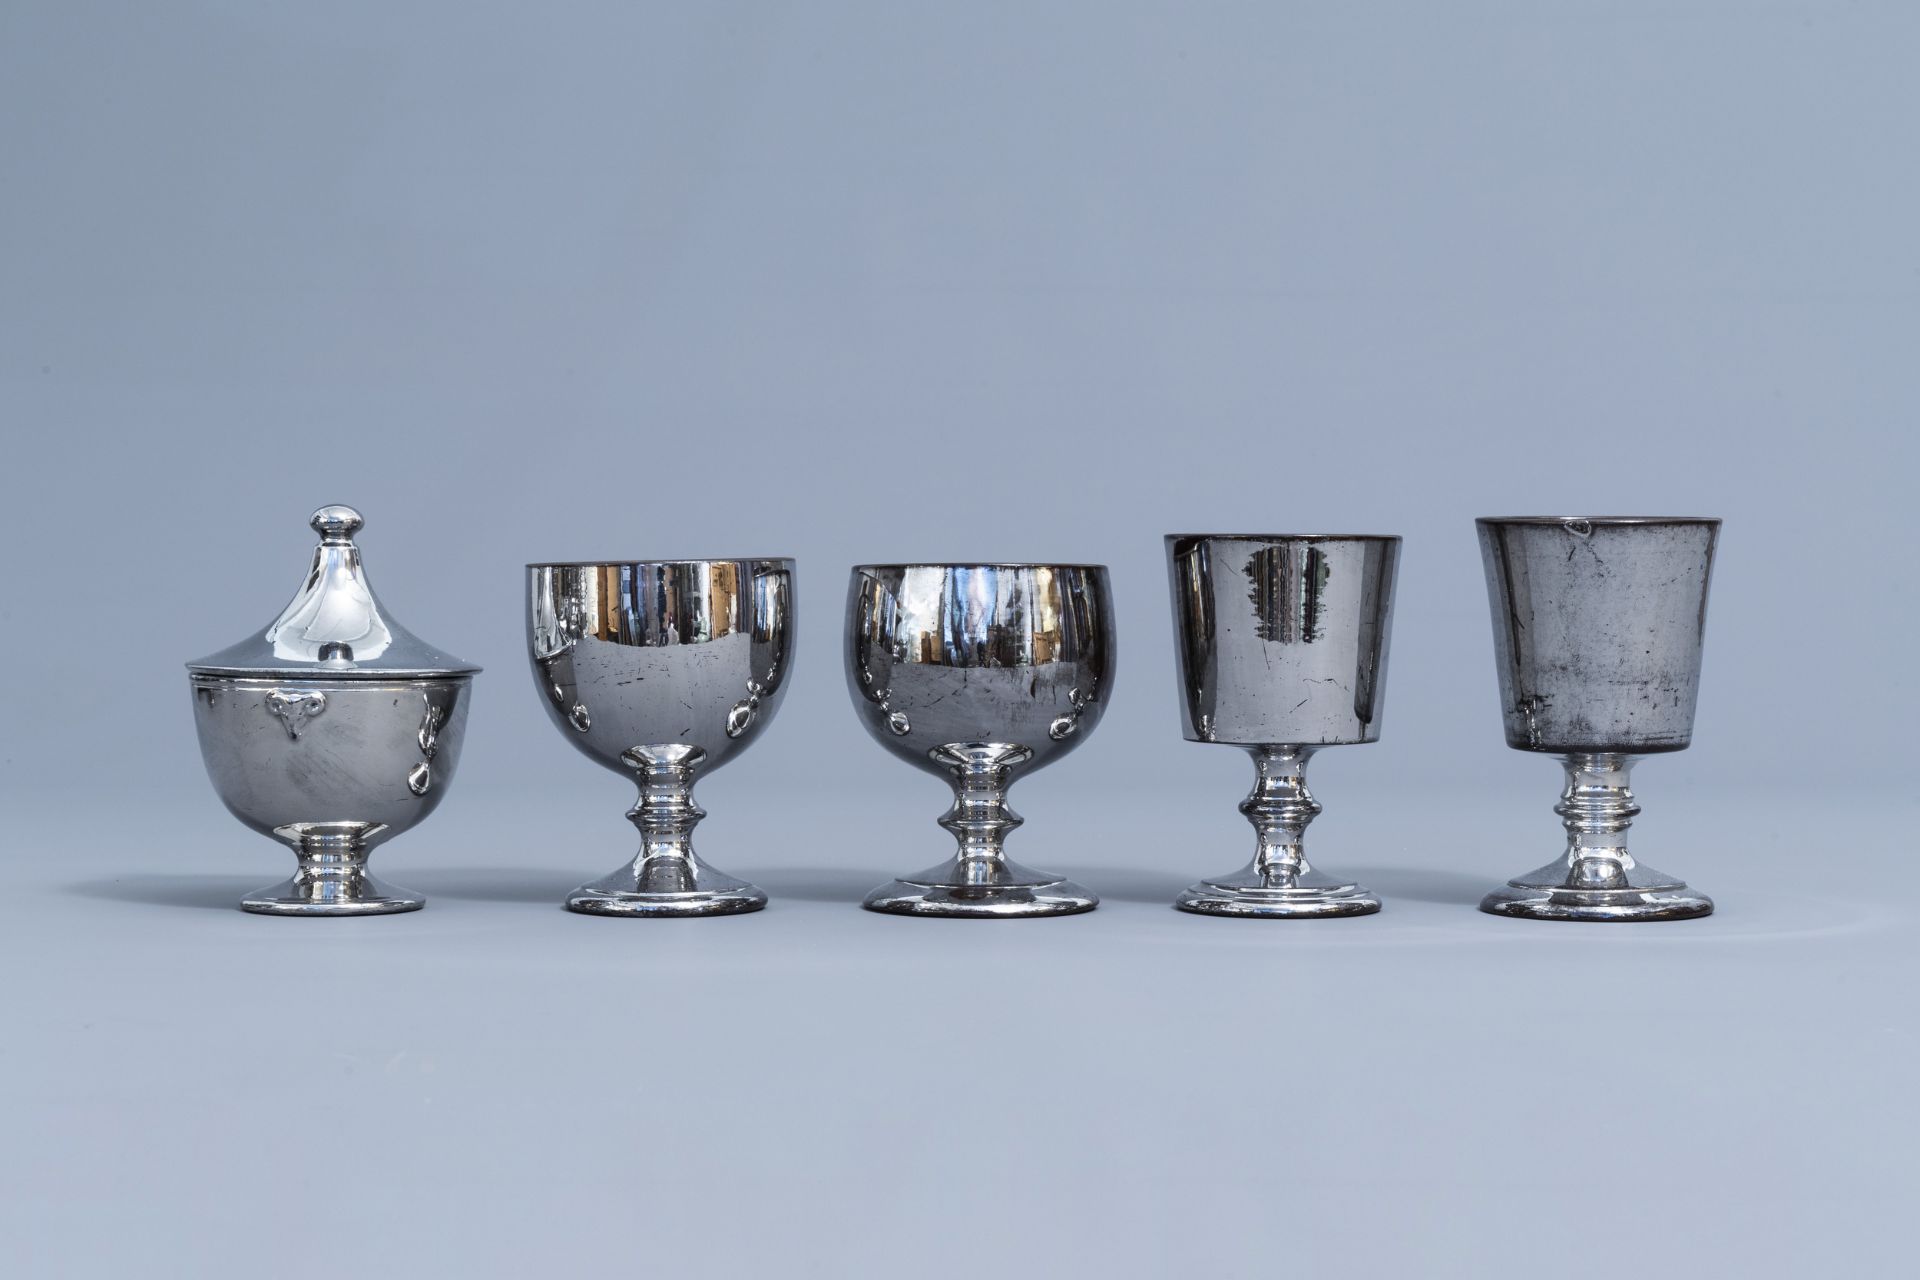 A varied collection of English silver lustreware items, 19th C. - Image 50 of 54